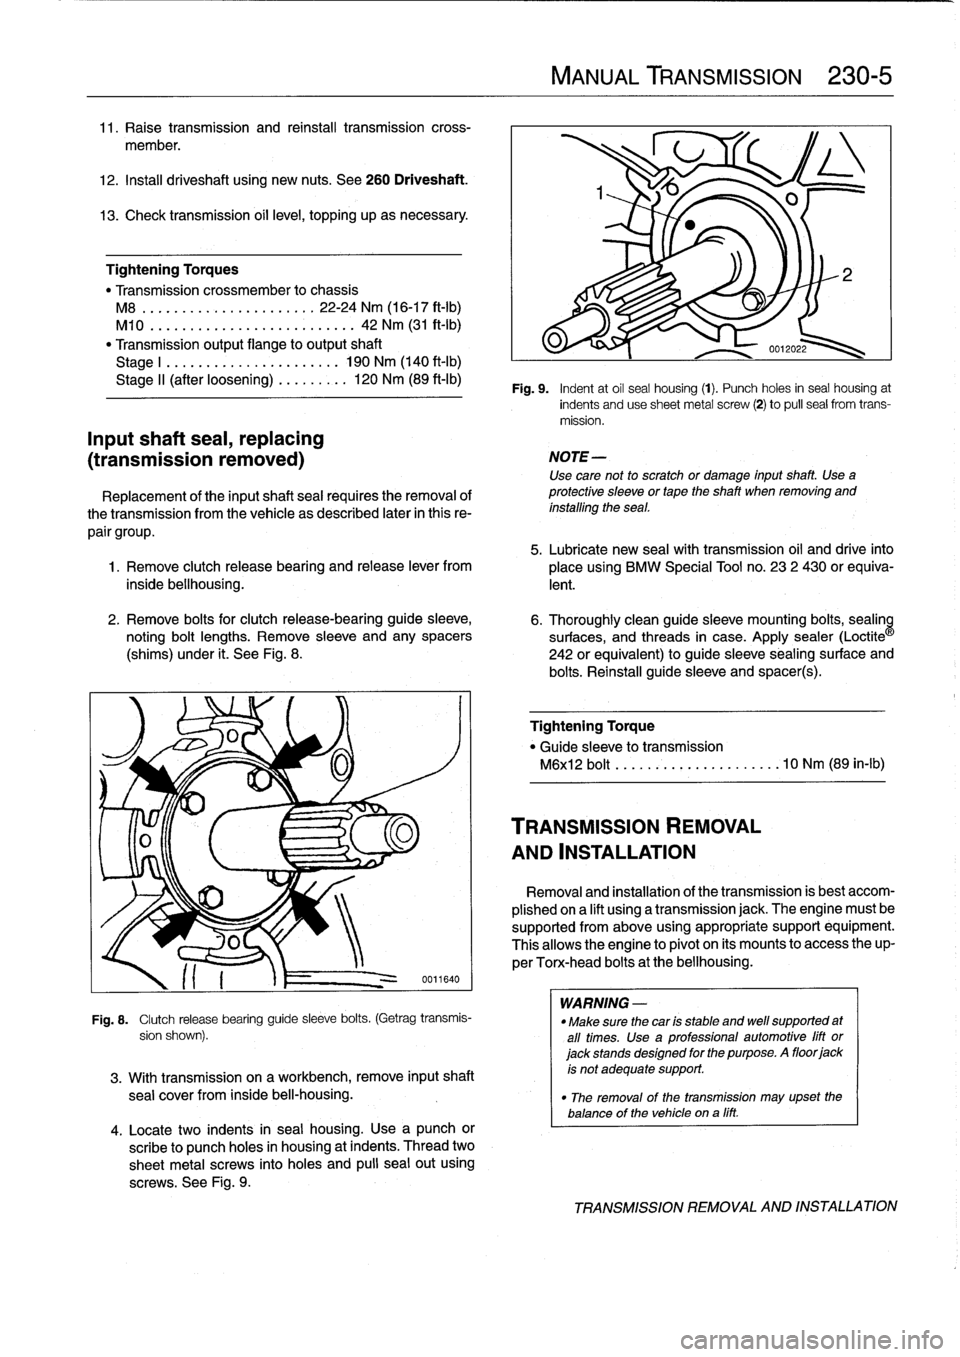 BMW 328i 1995 E36 Workshop Manual 
11
.
Raise
transmission
and
reinstall
transmission
cross-

member
.

12
.
Install
driveshaft
using
new
nuts
.
See
260
Driveshaft
.

13
.
Check
transmission
oil
leve¡,
topping
up
asnecessary
.

Tight